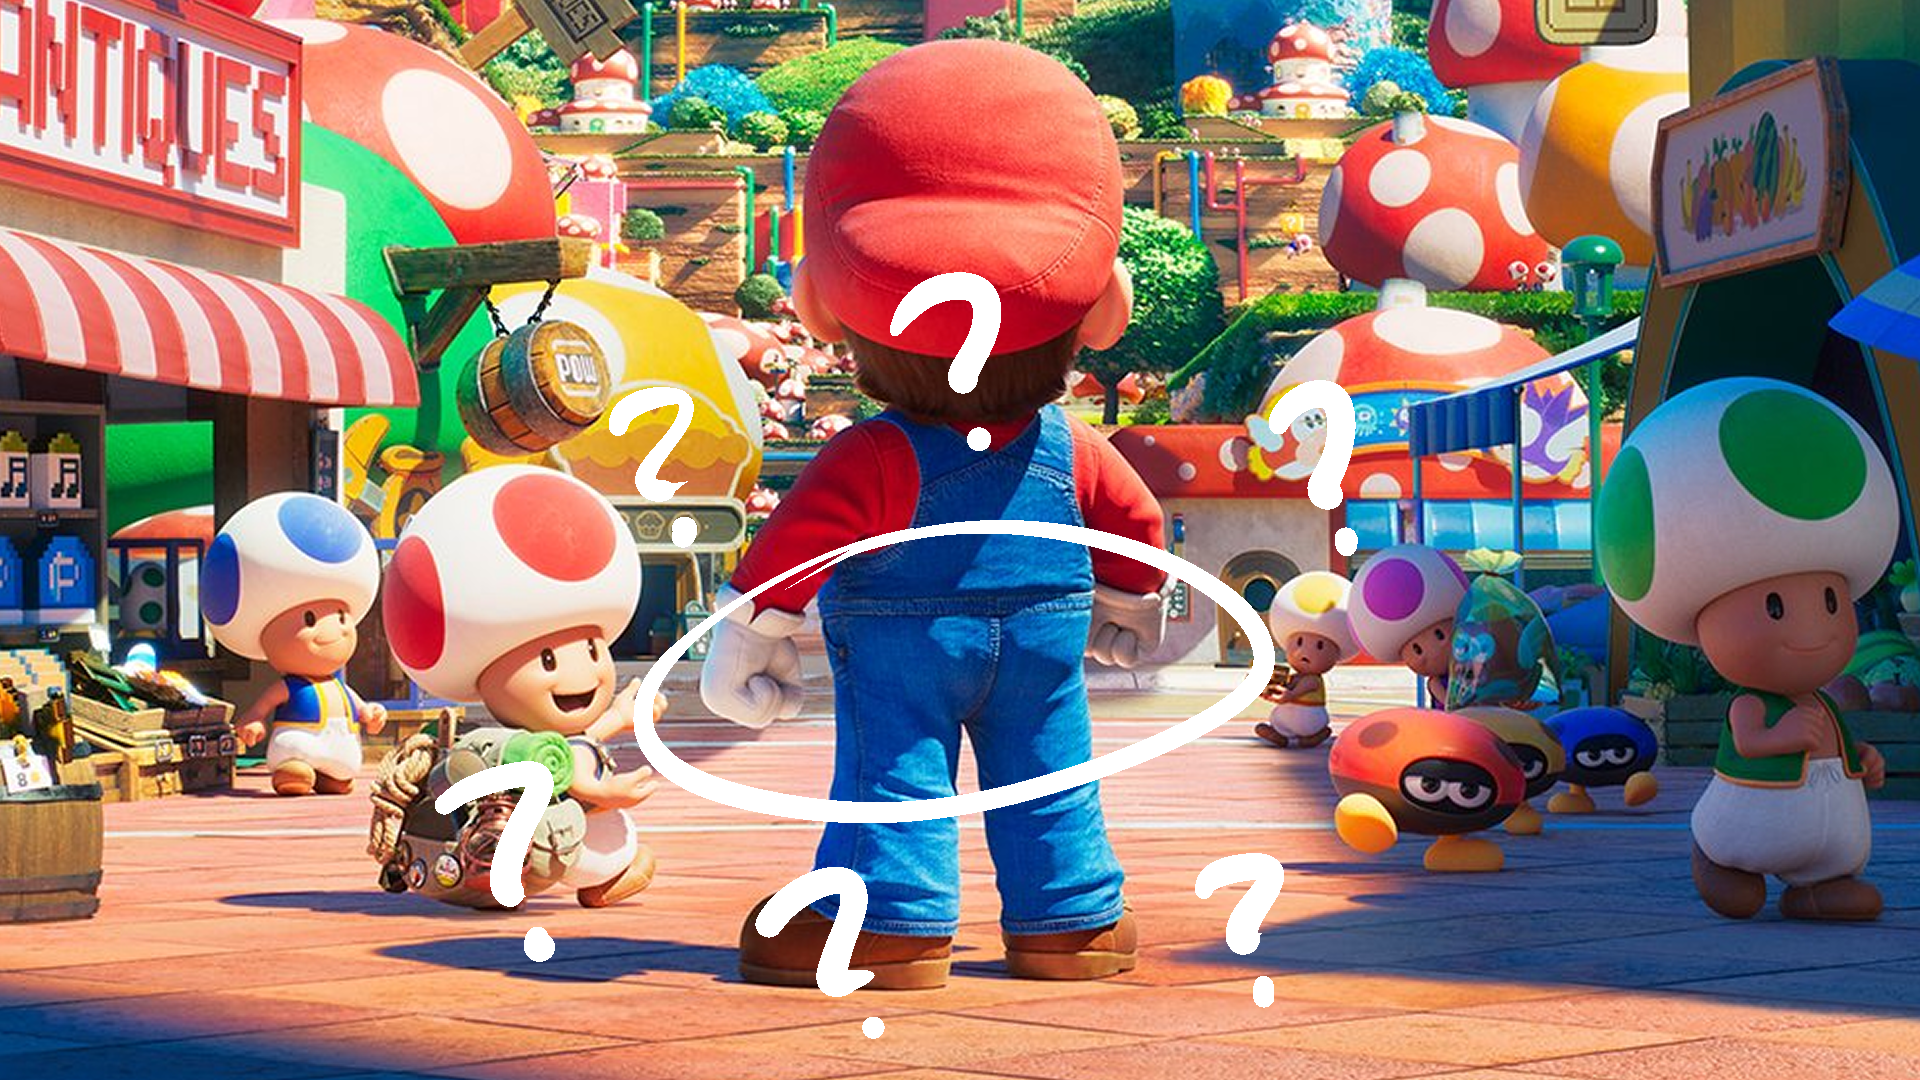 A teaser shot from the Mario feature film, with a circle and question marks drawn around his suspiciously small butt.